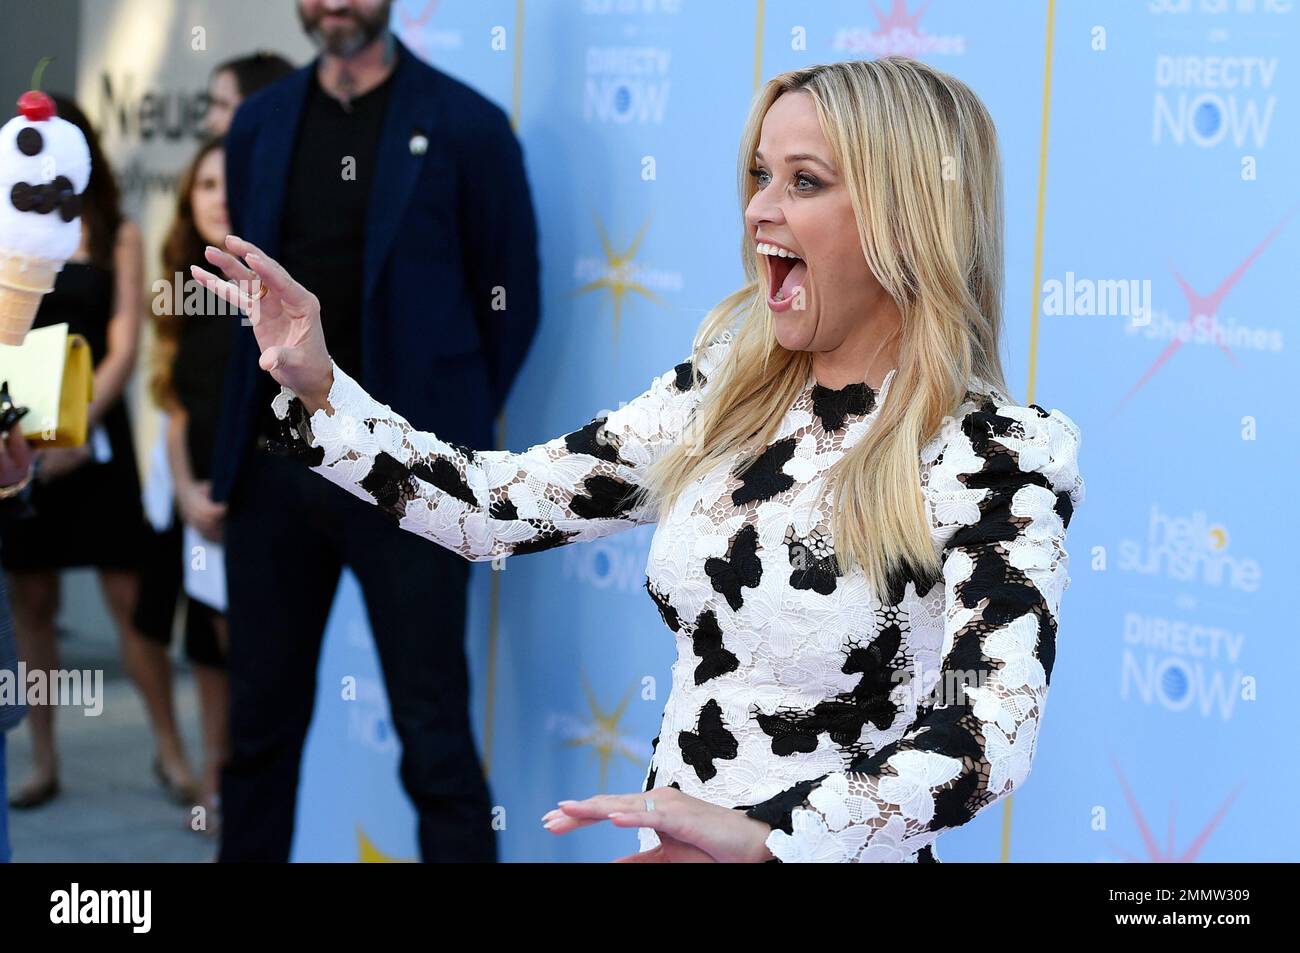 Reese Witherspoon jokingly reenacts the time she threw an ice-cream cone at Meryl Streep at the Hello Sunshine Video on Demand channel launch at NeueHouse Hollywood on Monday, Aug